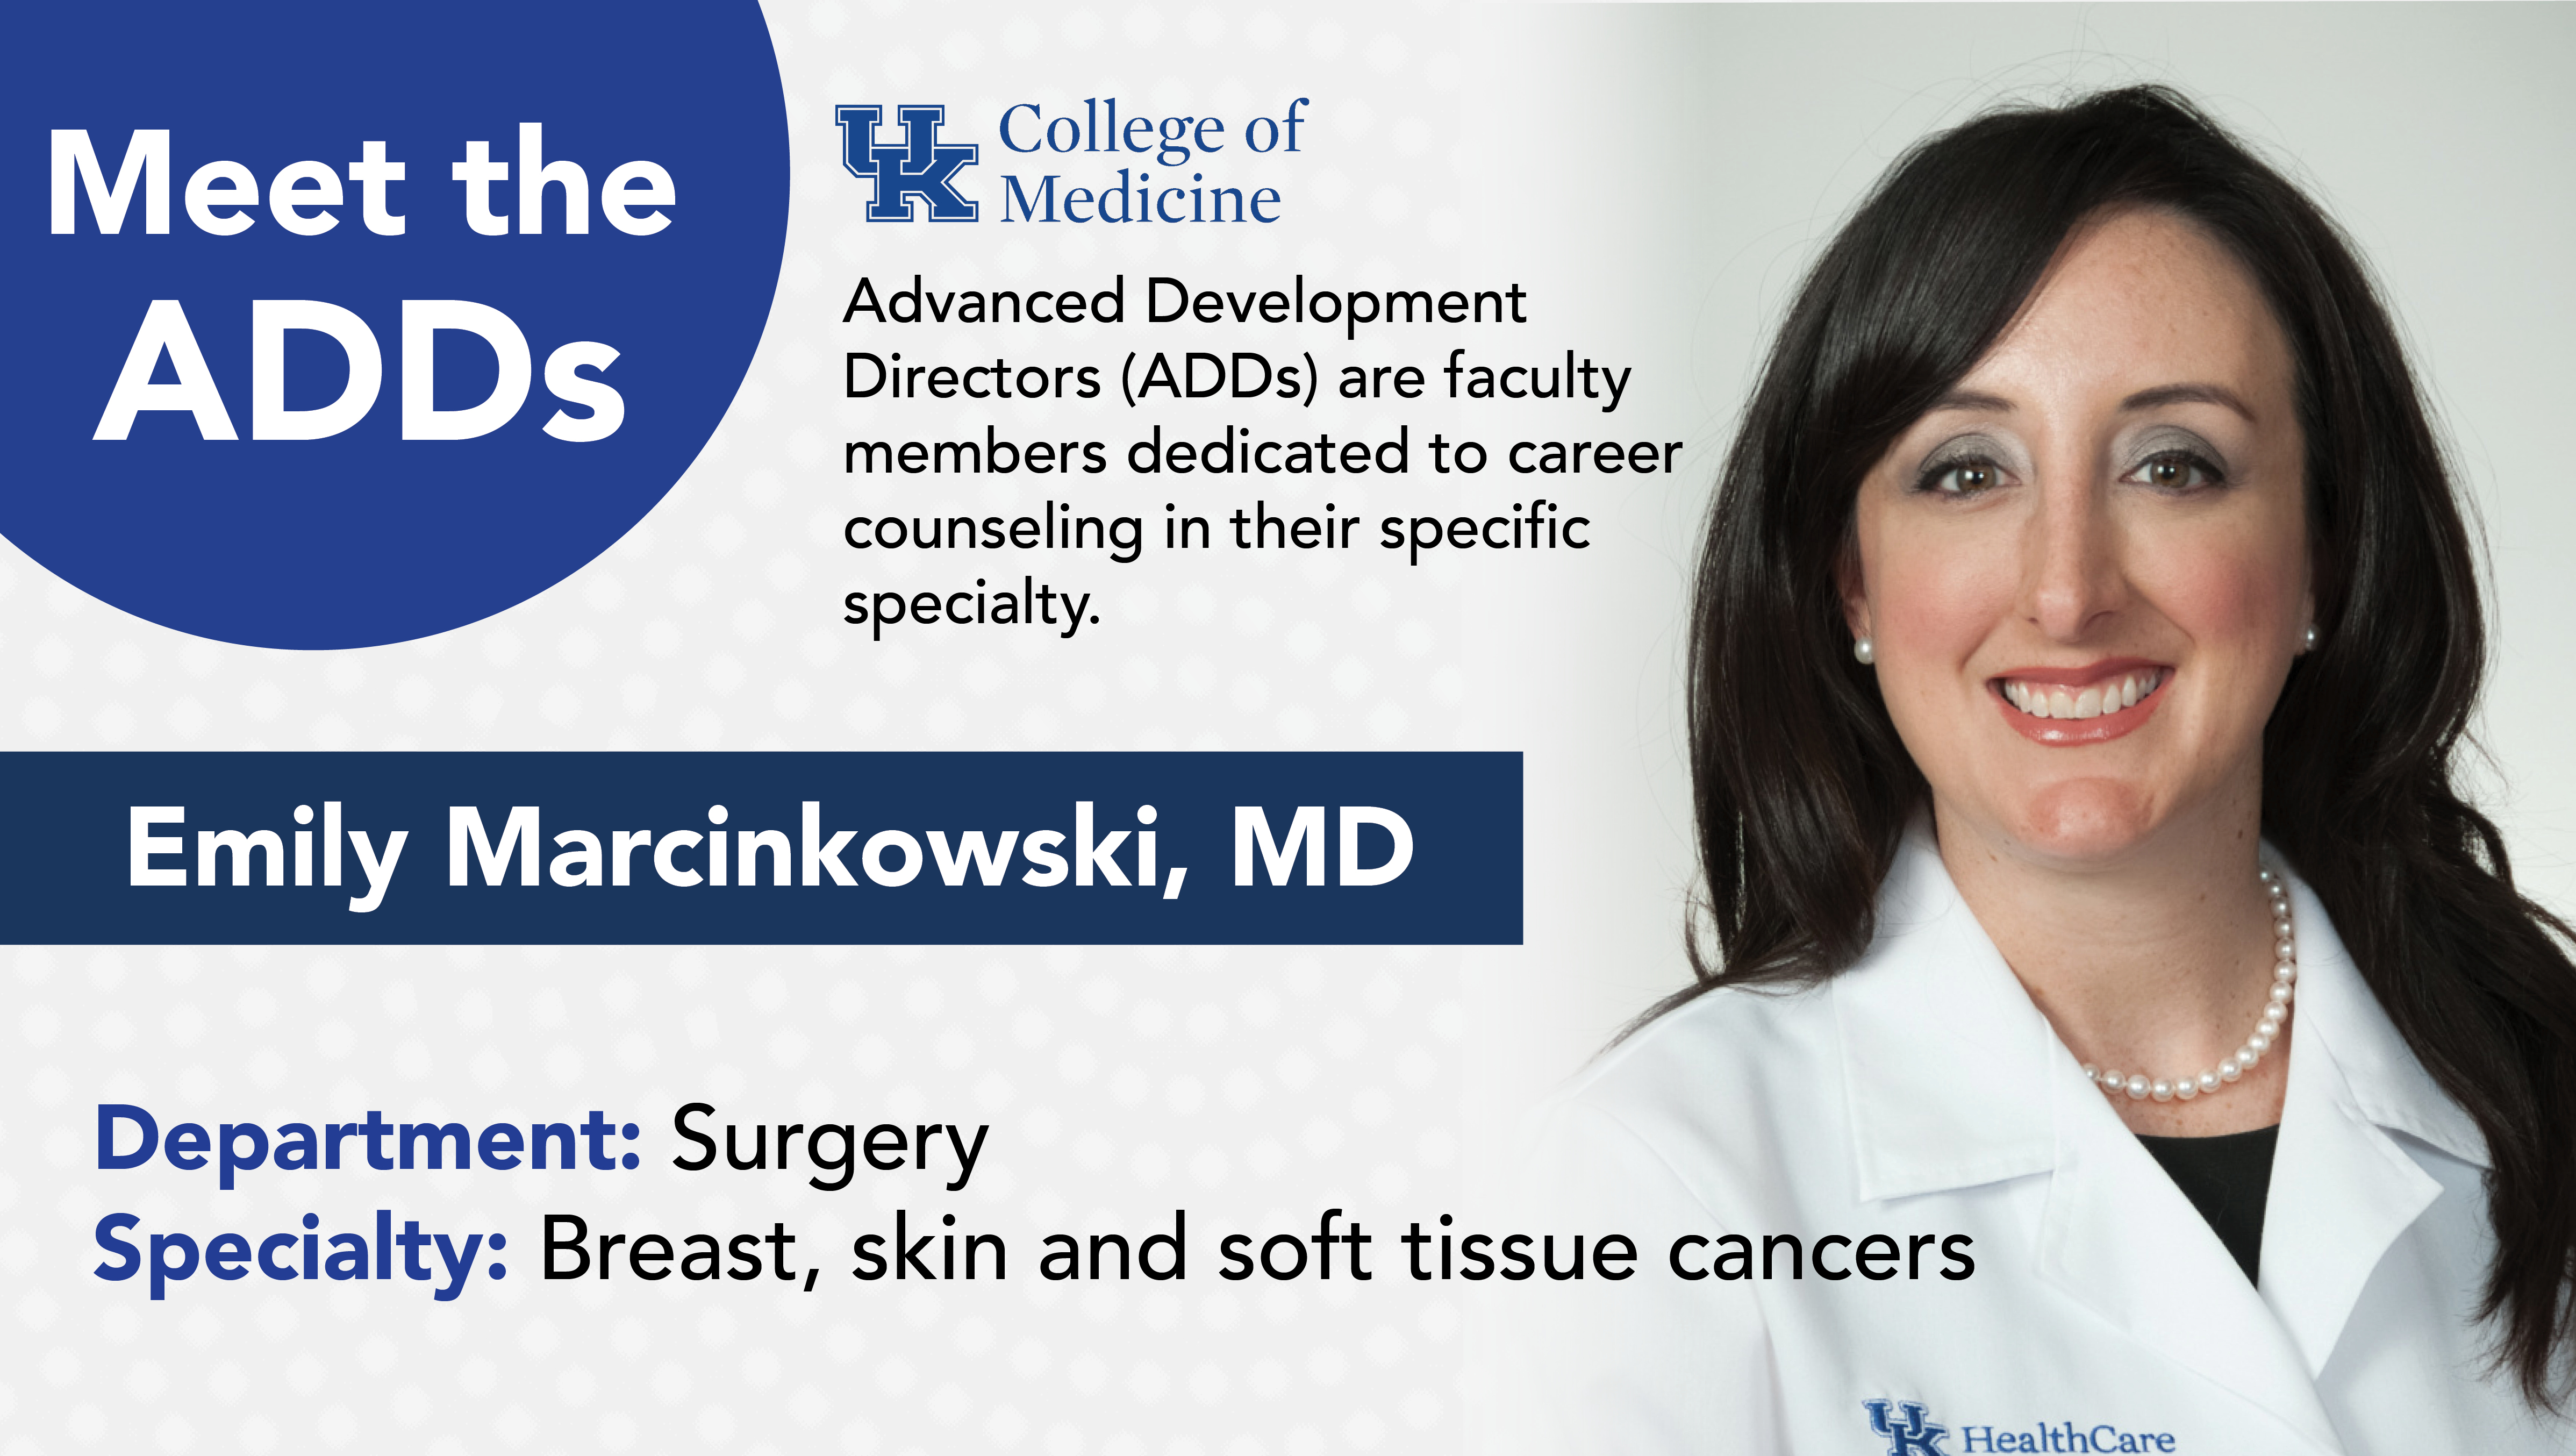 Meet the ADDs Spotlight on Dr. Emily Marcinkowski, who specializes in oncological surgery..